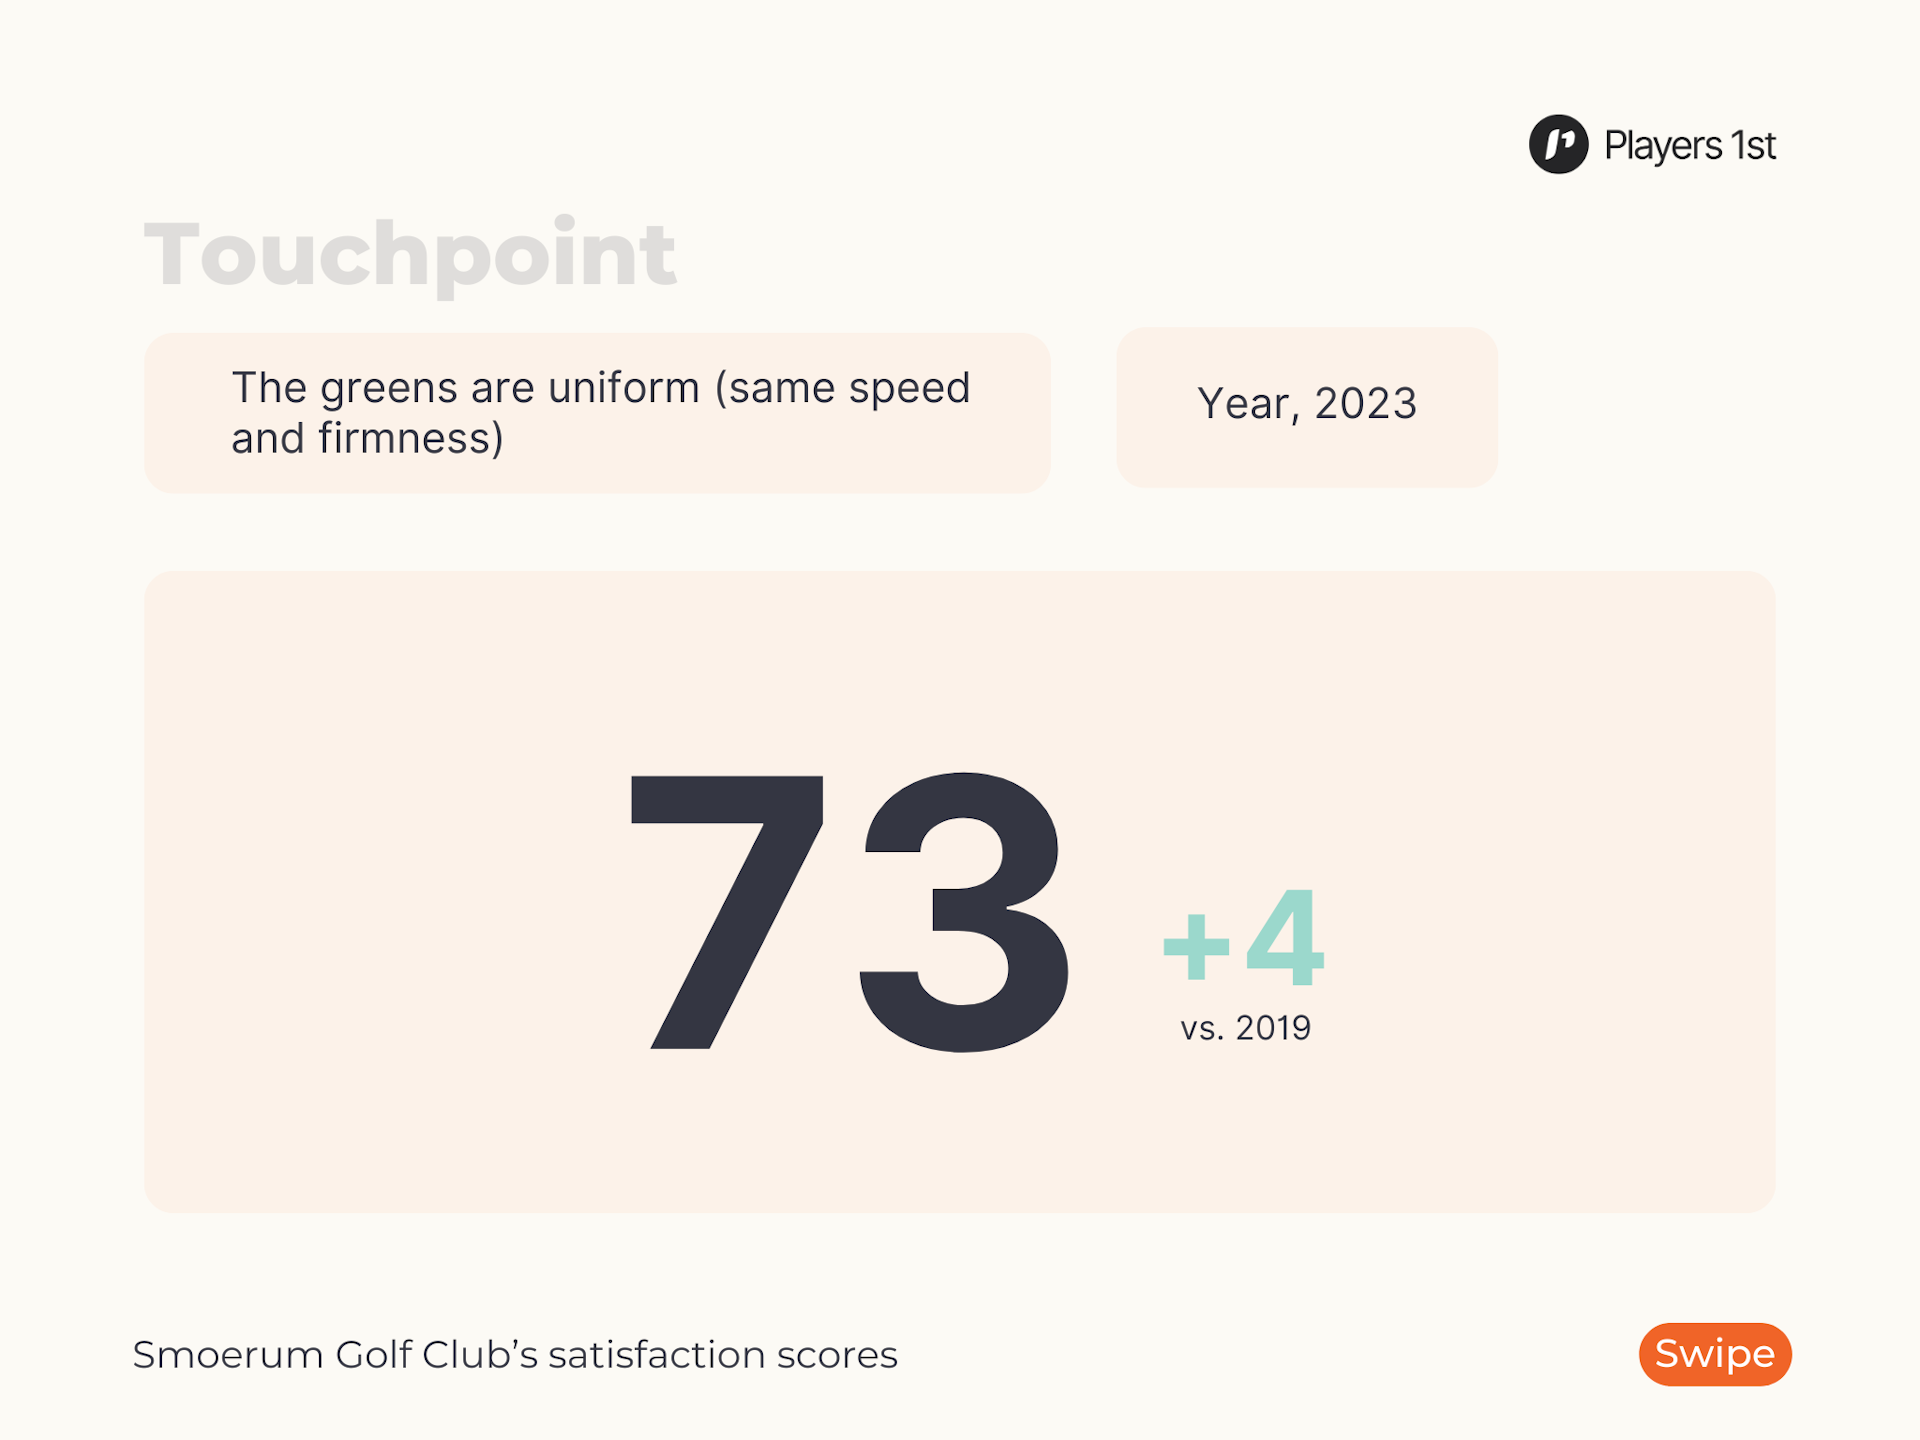 Touchpoint: The greens are uniform (same speed and firmness).